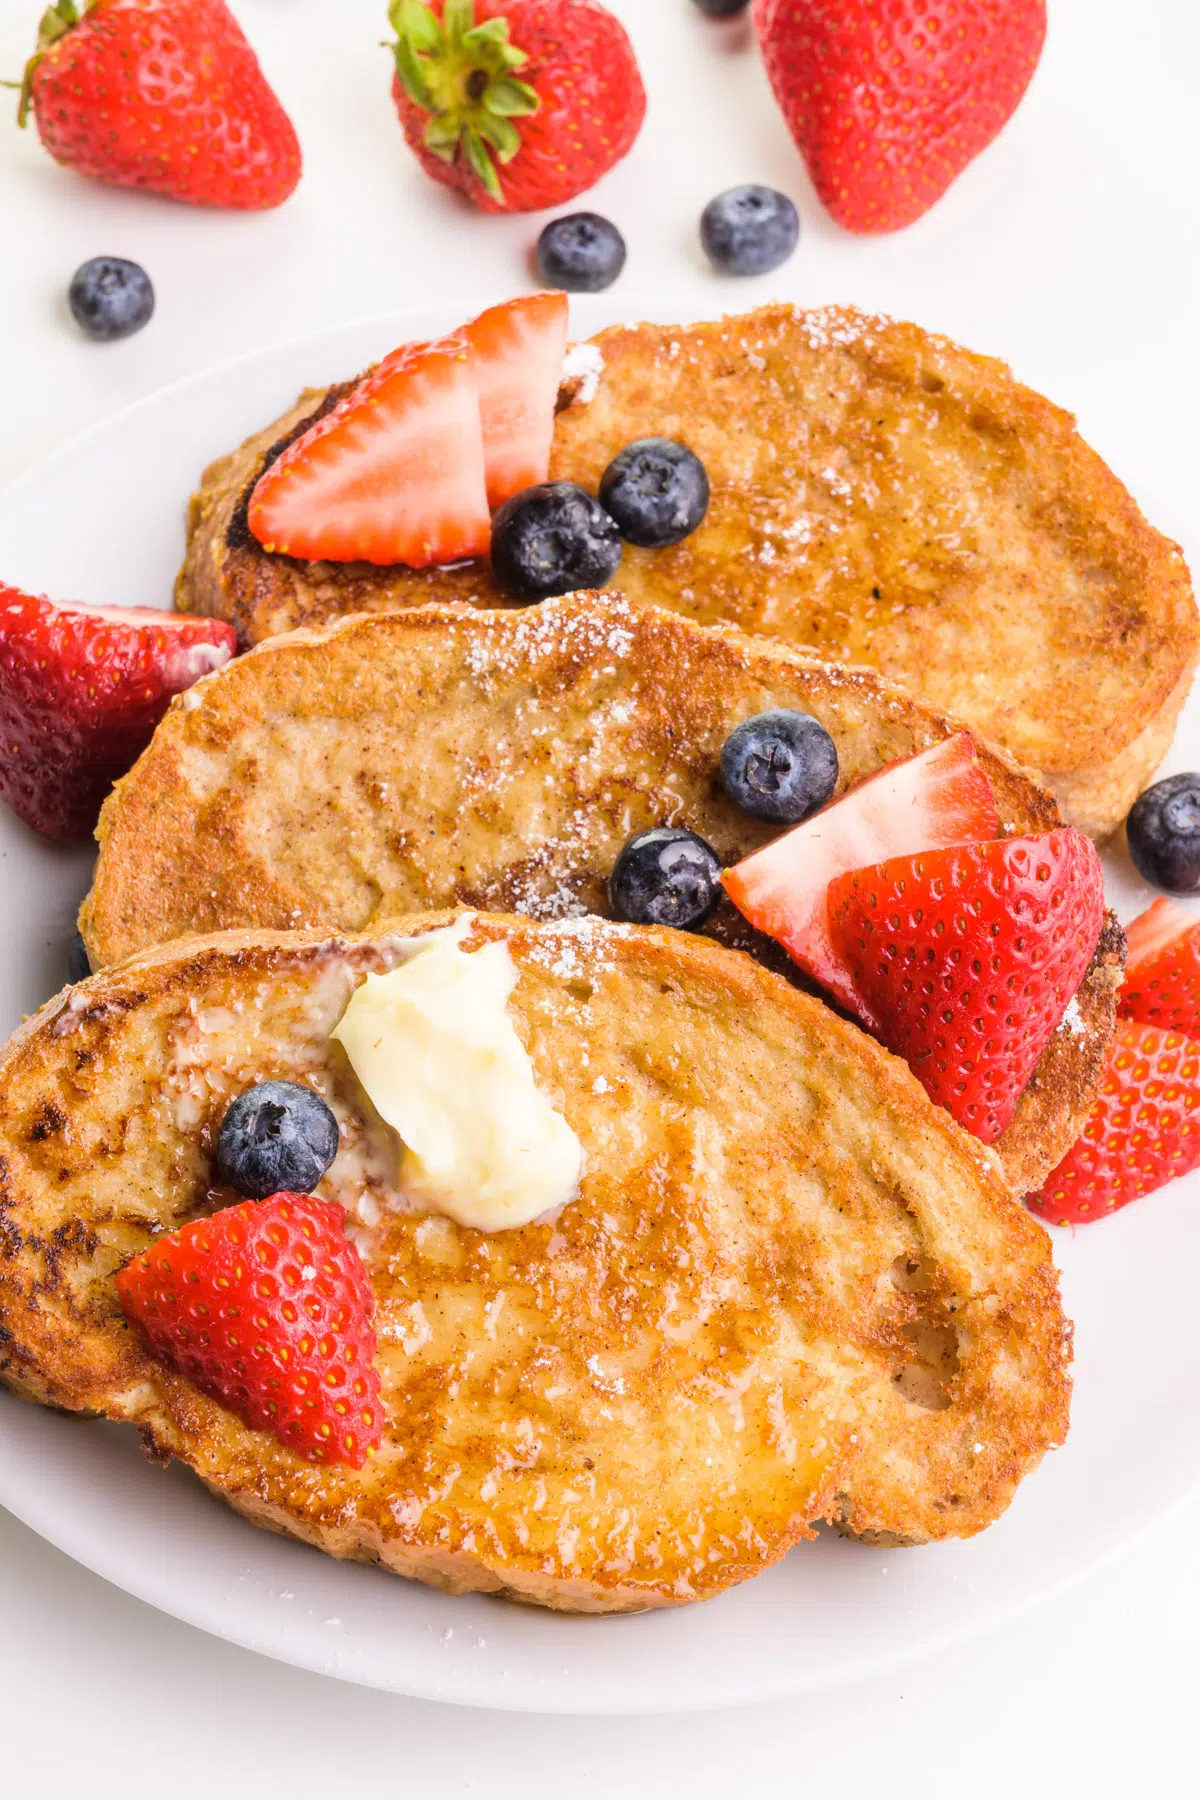 Three slices of French toast have fruit on top, some butter, and powdered sugar. There is fresh fruit situated around the plate.